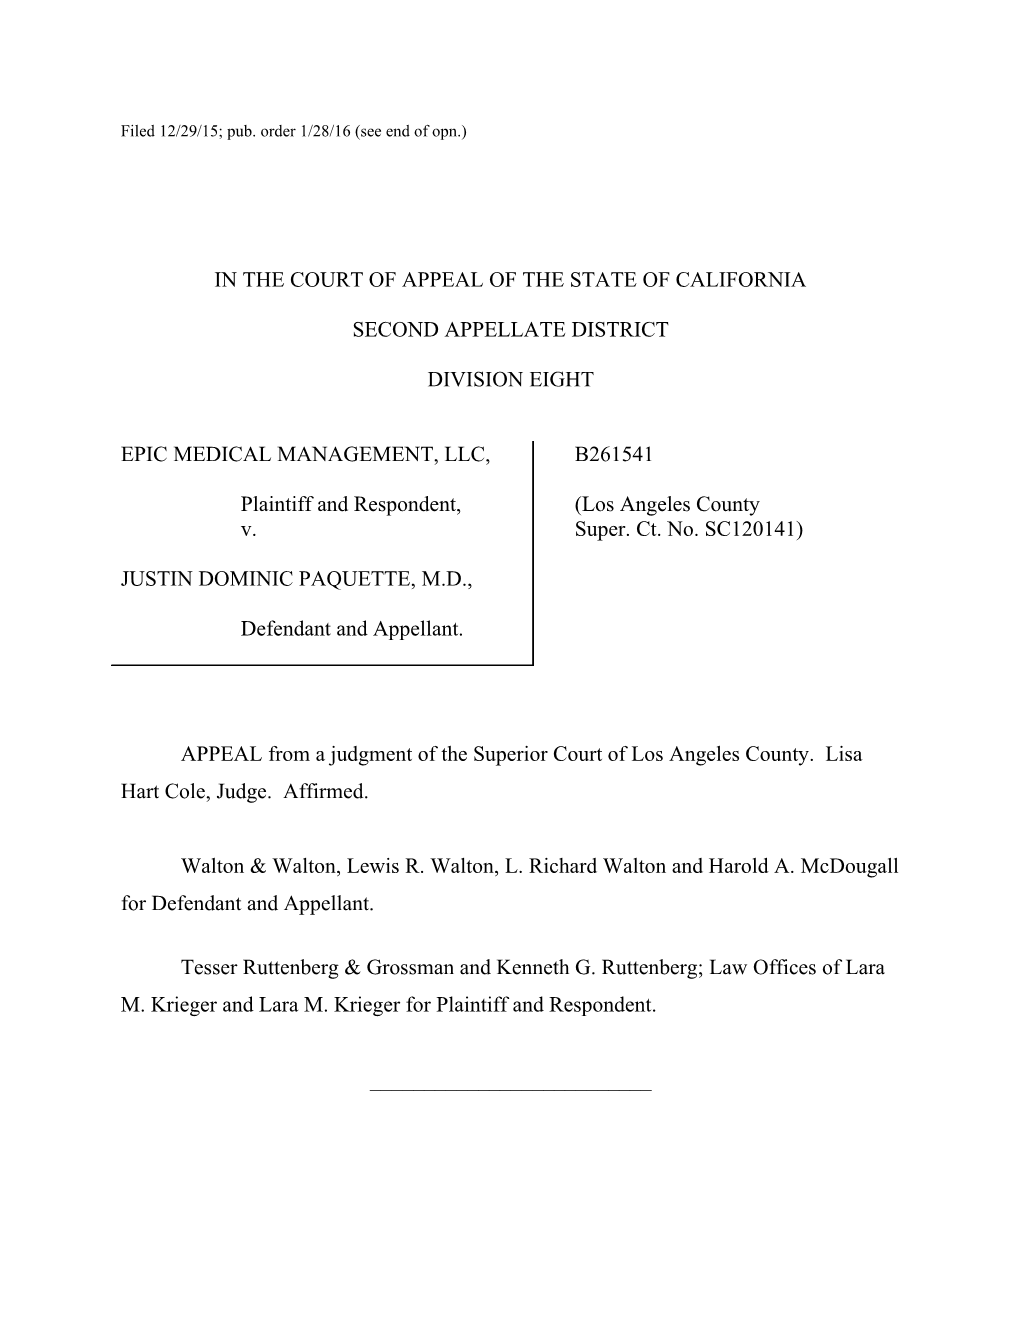 Filed 12/29/15; Pub. Order 1/28/16 (See End of Opn.)